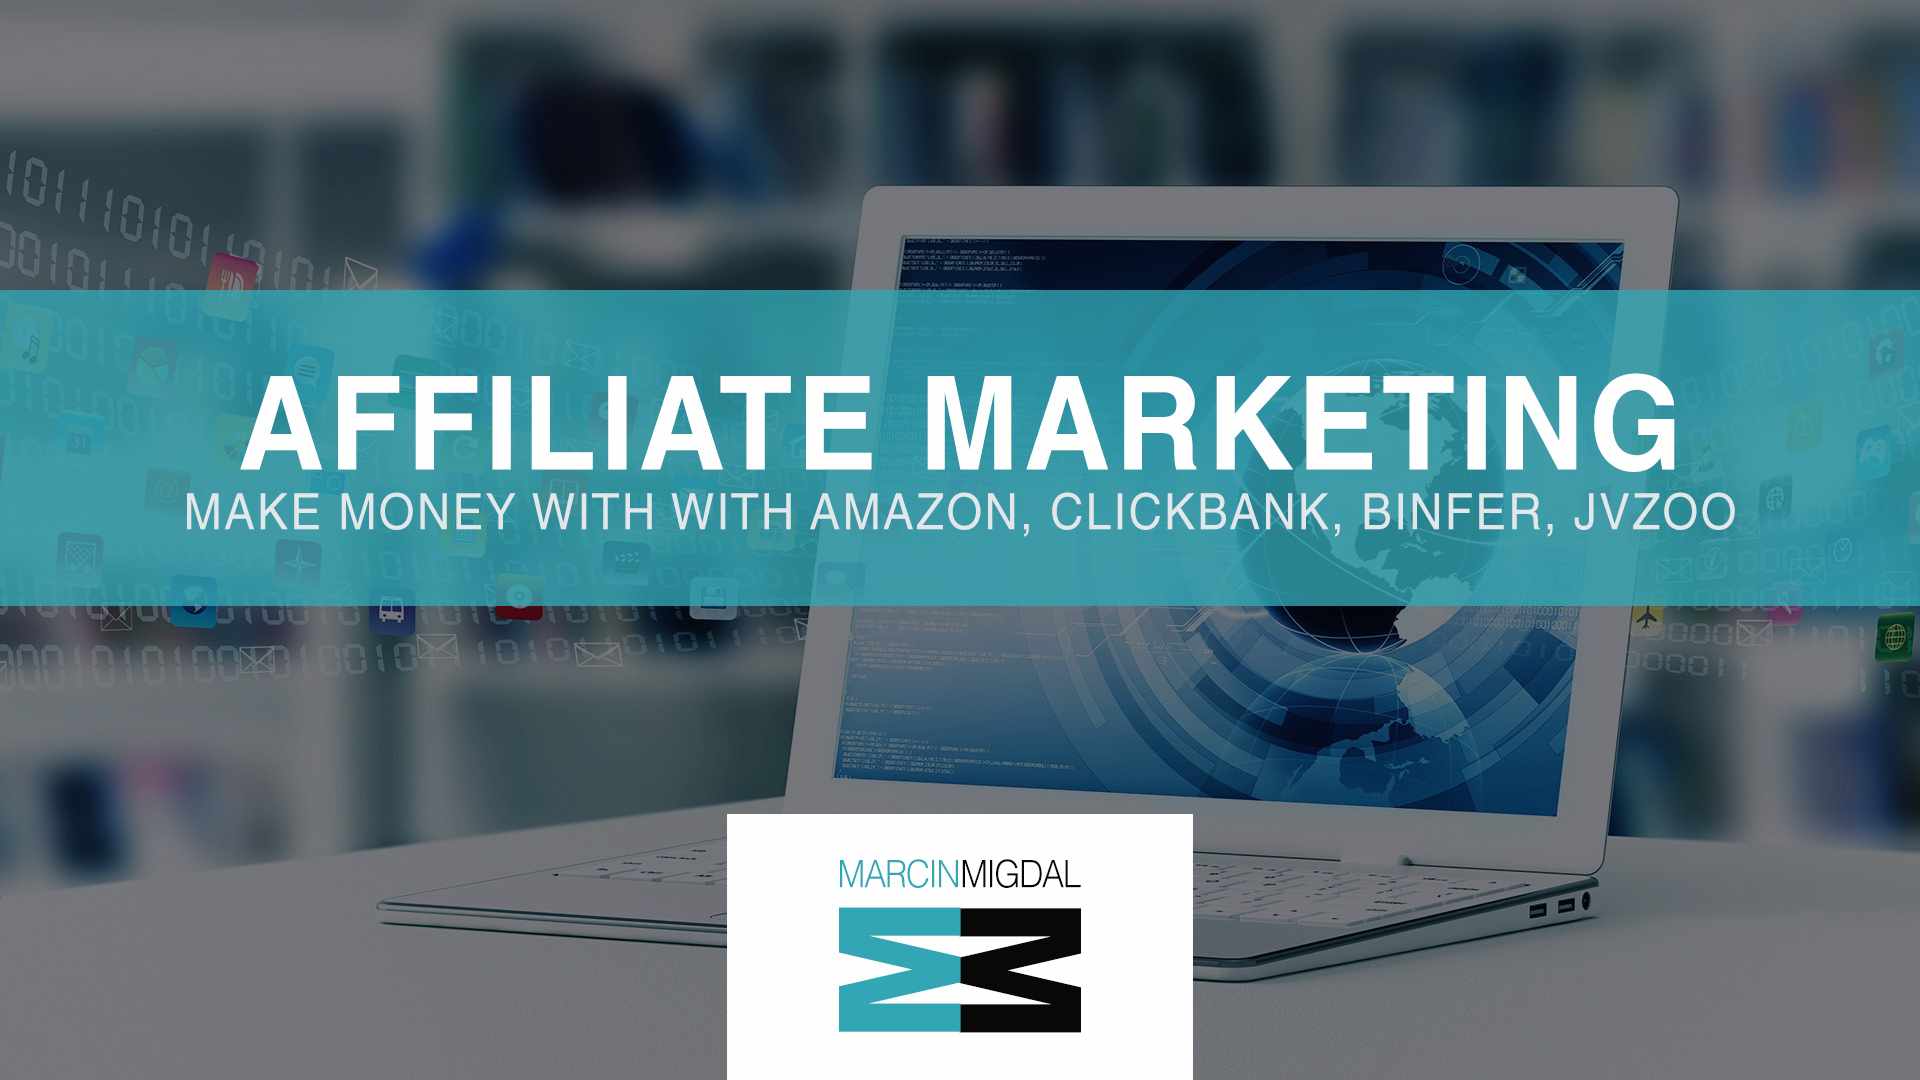 21 Real Life Examples of Successful Affiliate Marketing Websites in 2019